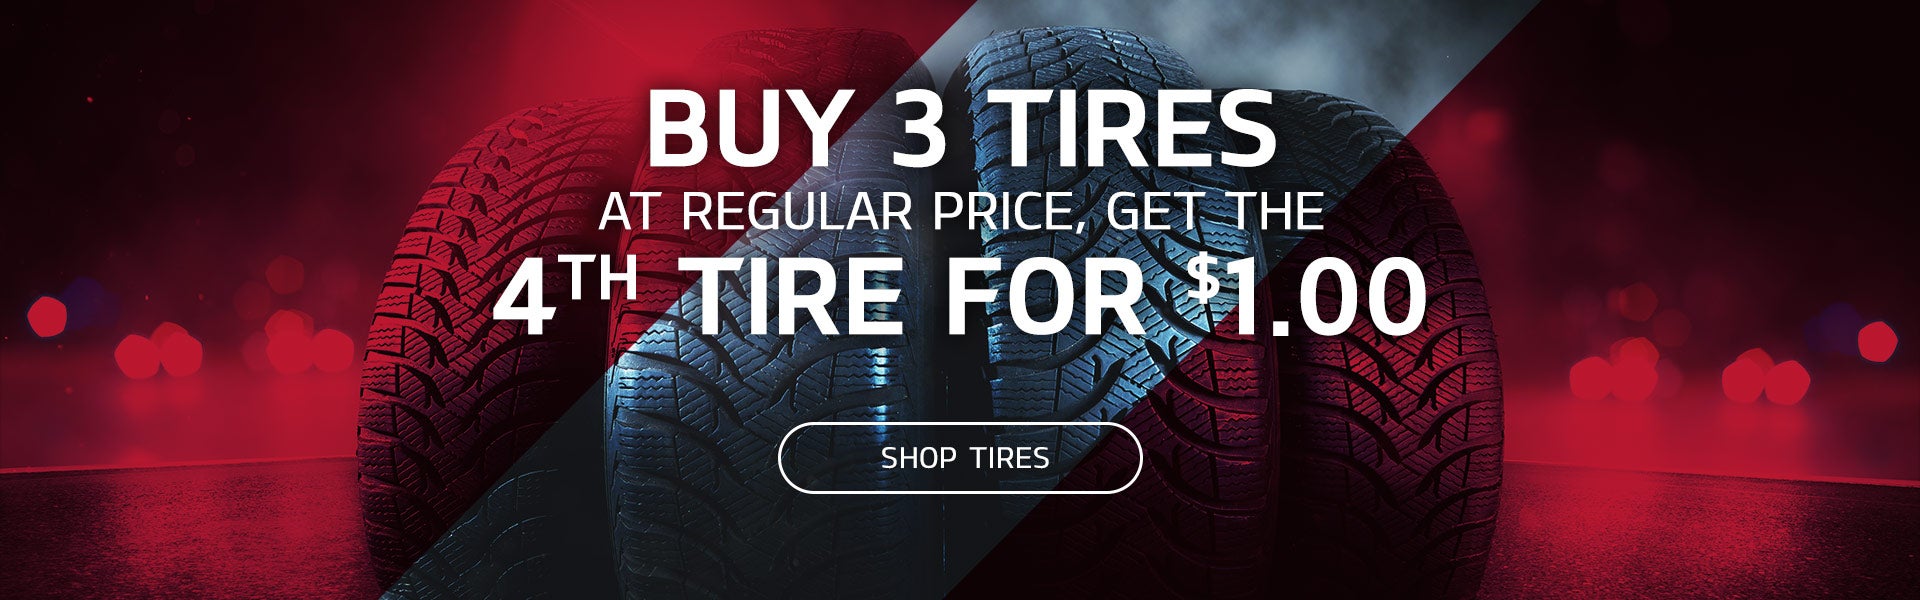 Tire Special 